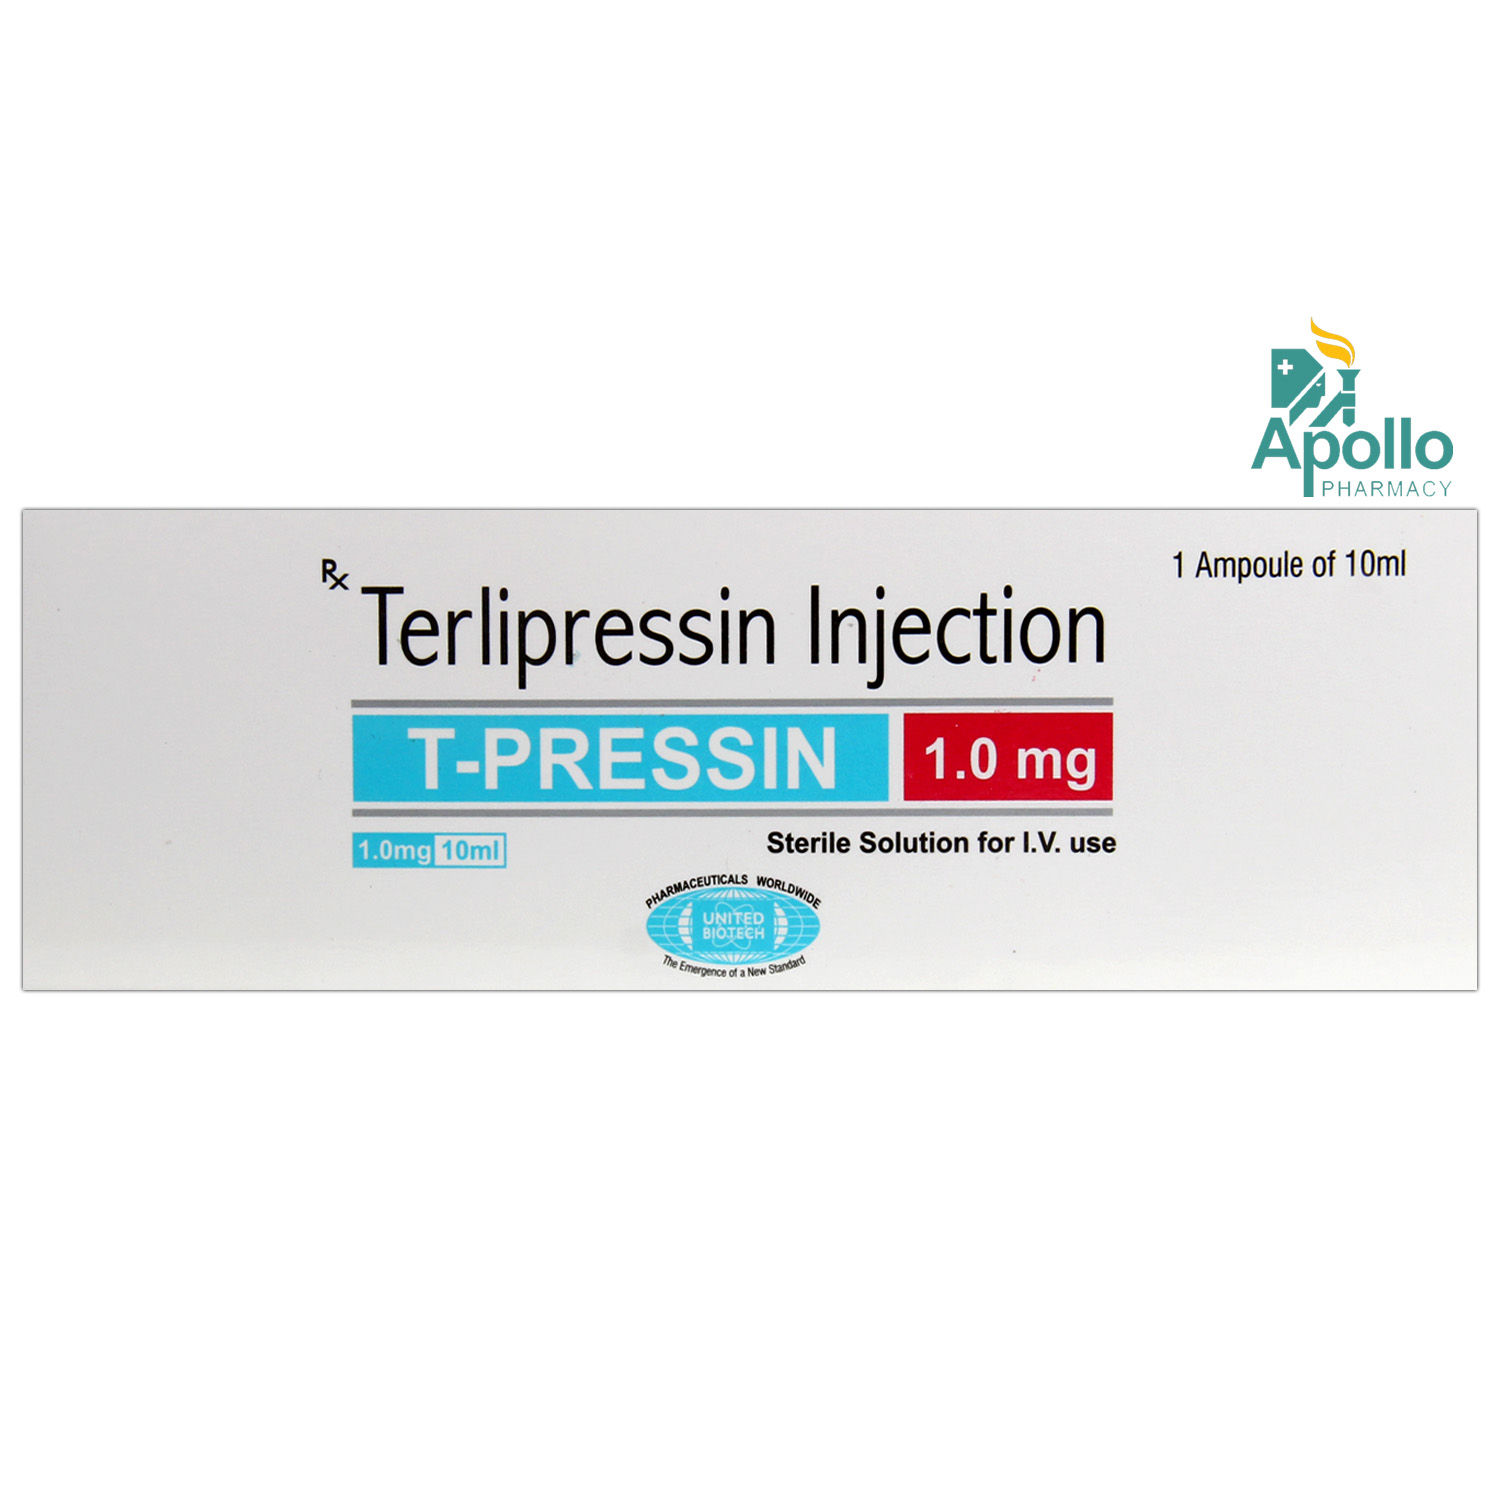 Buy TPRESSIN 1.0MG INJECTION 10ML Online